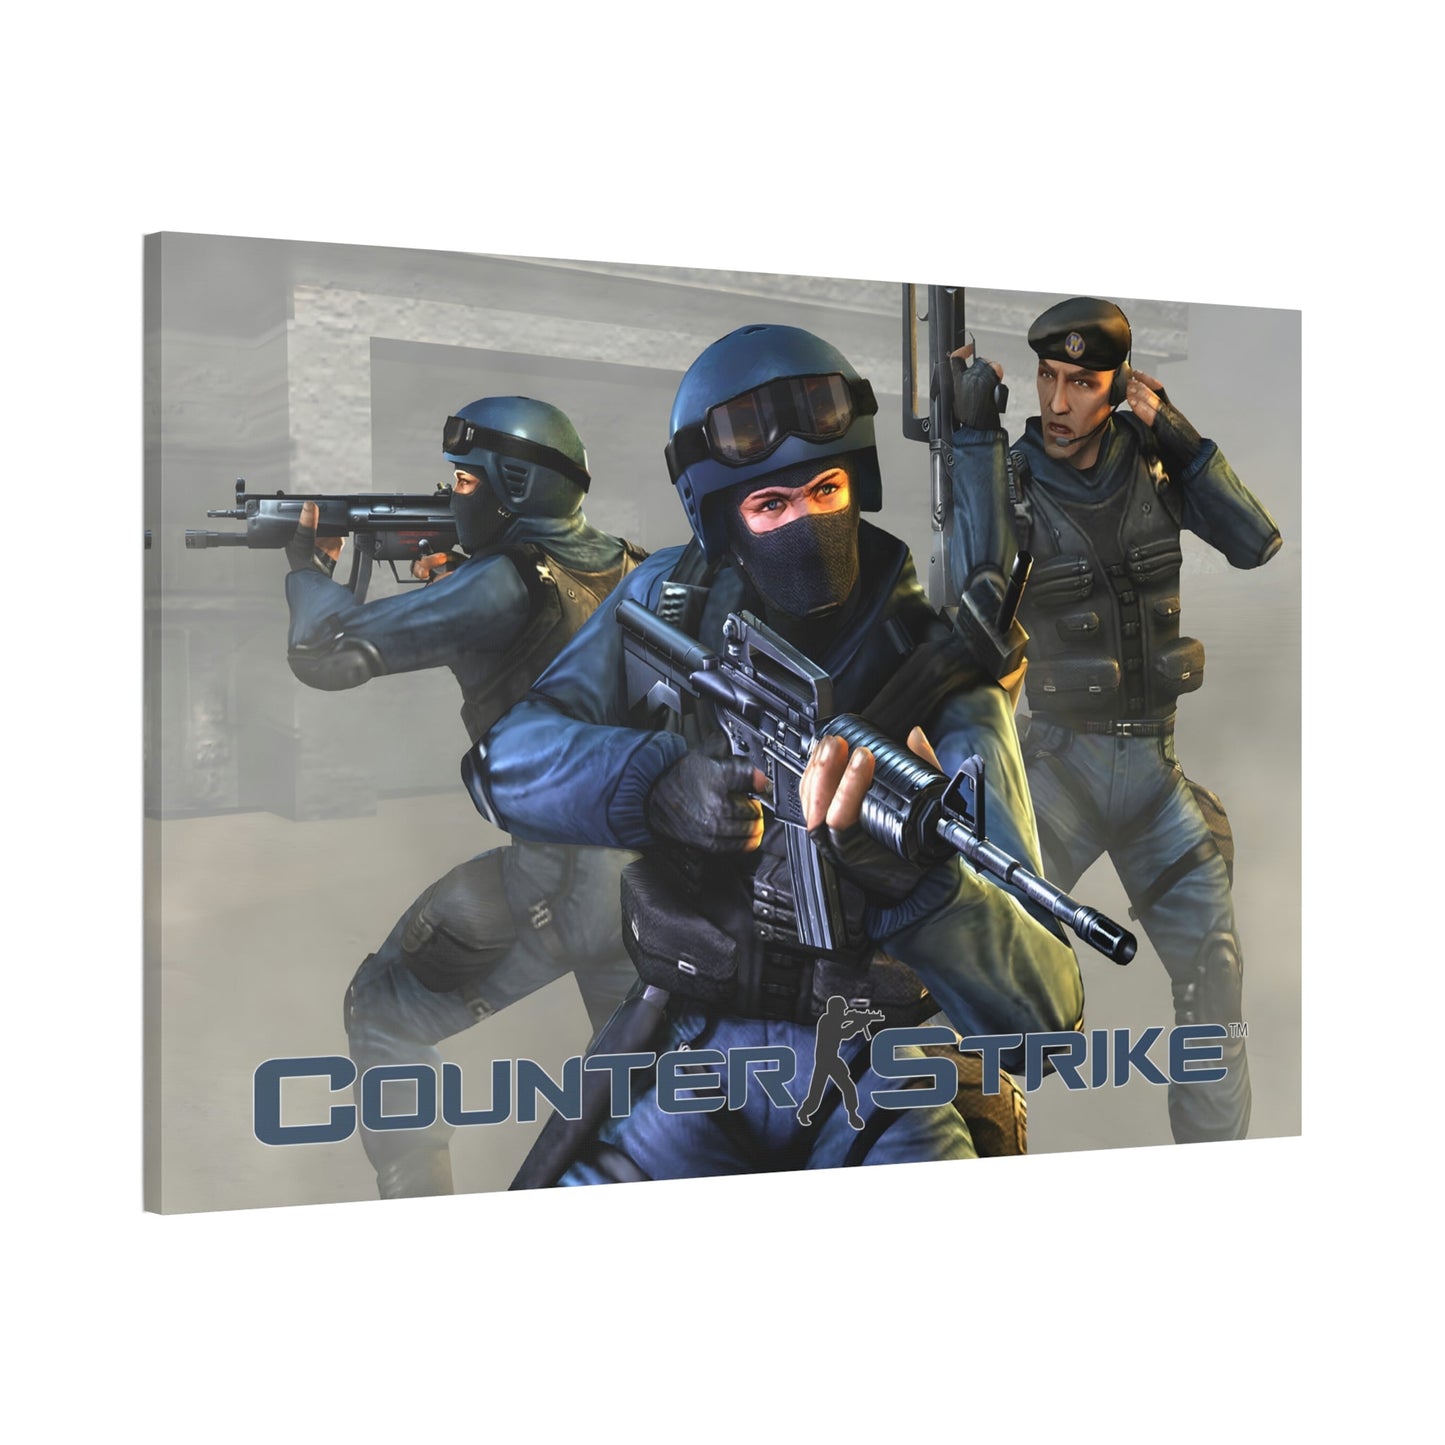 Game On: Iconic Counter Strike Poster as Framed Wall Art